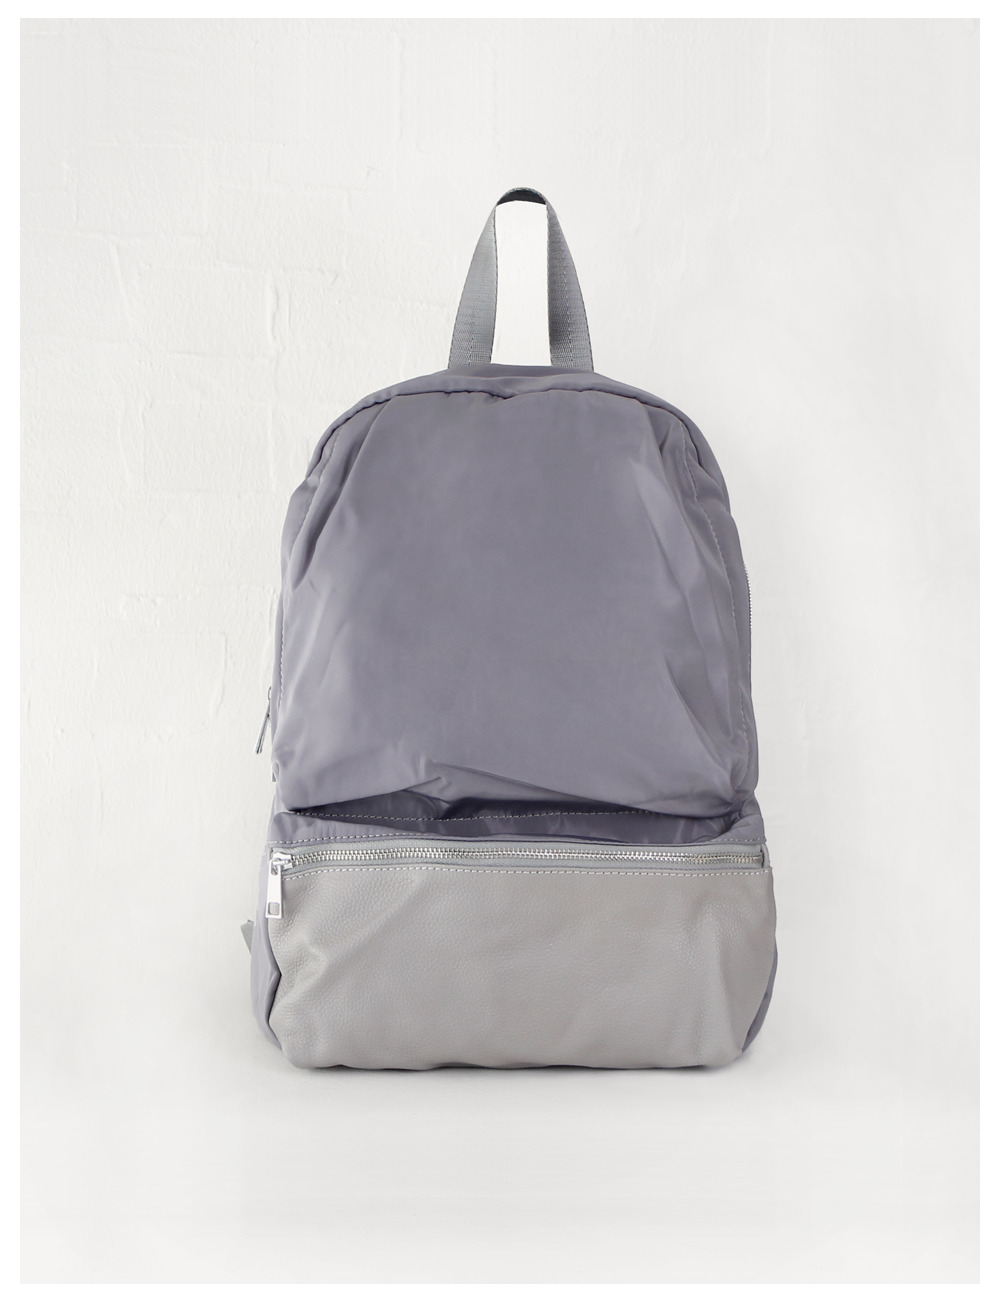 Dave gray leather back pack_Gray